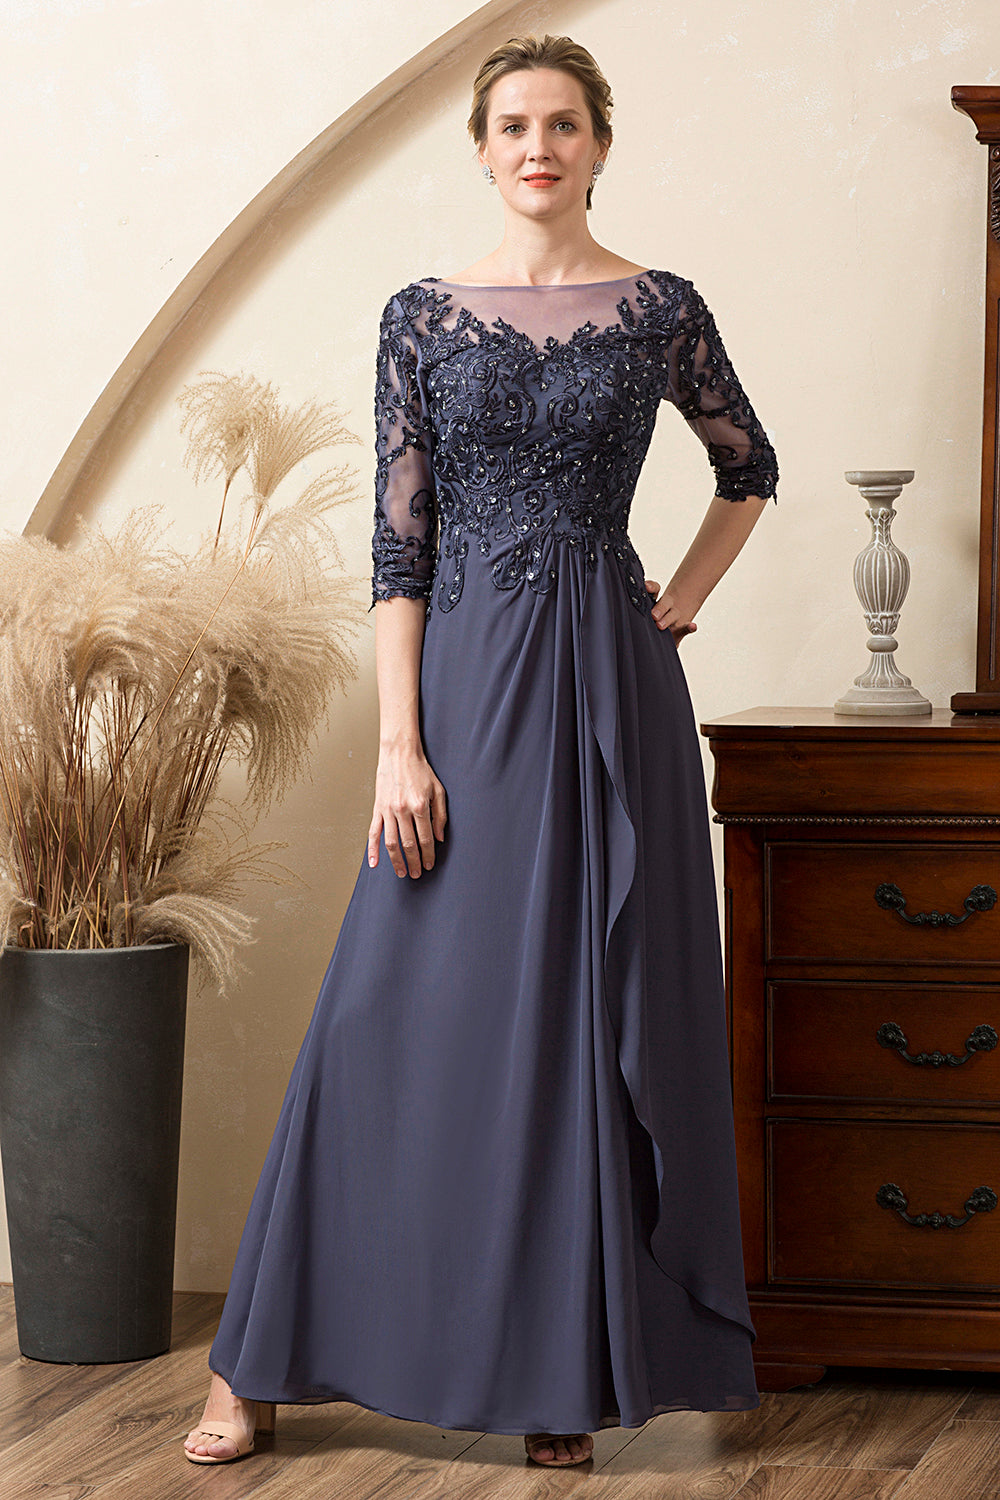 Grey Blue Sparkly Beaded Chiffon Mother of the Bride Dress